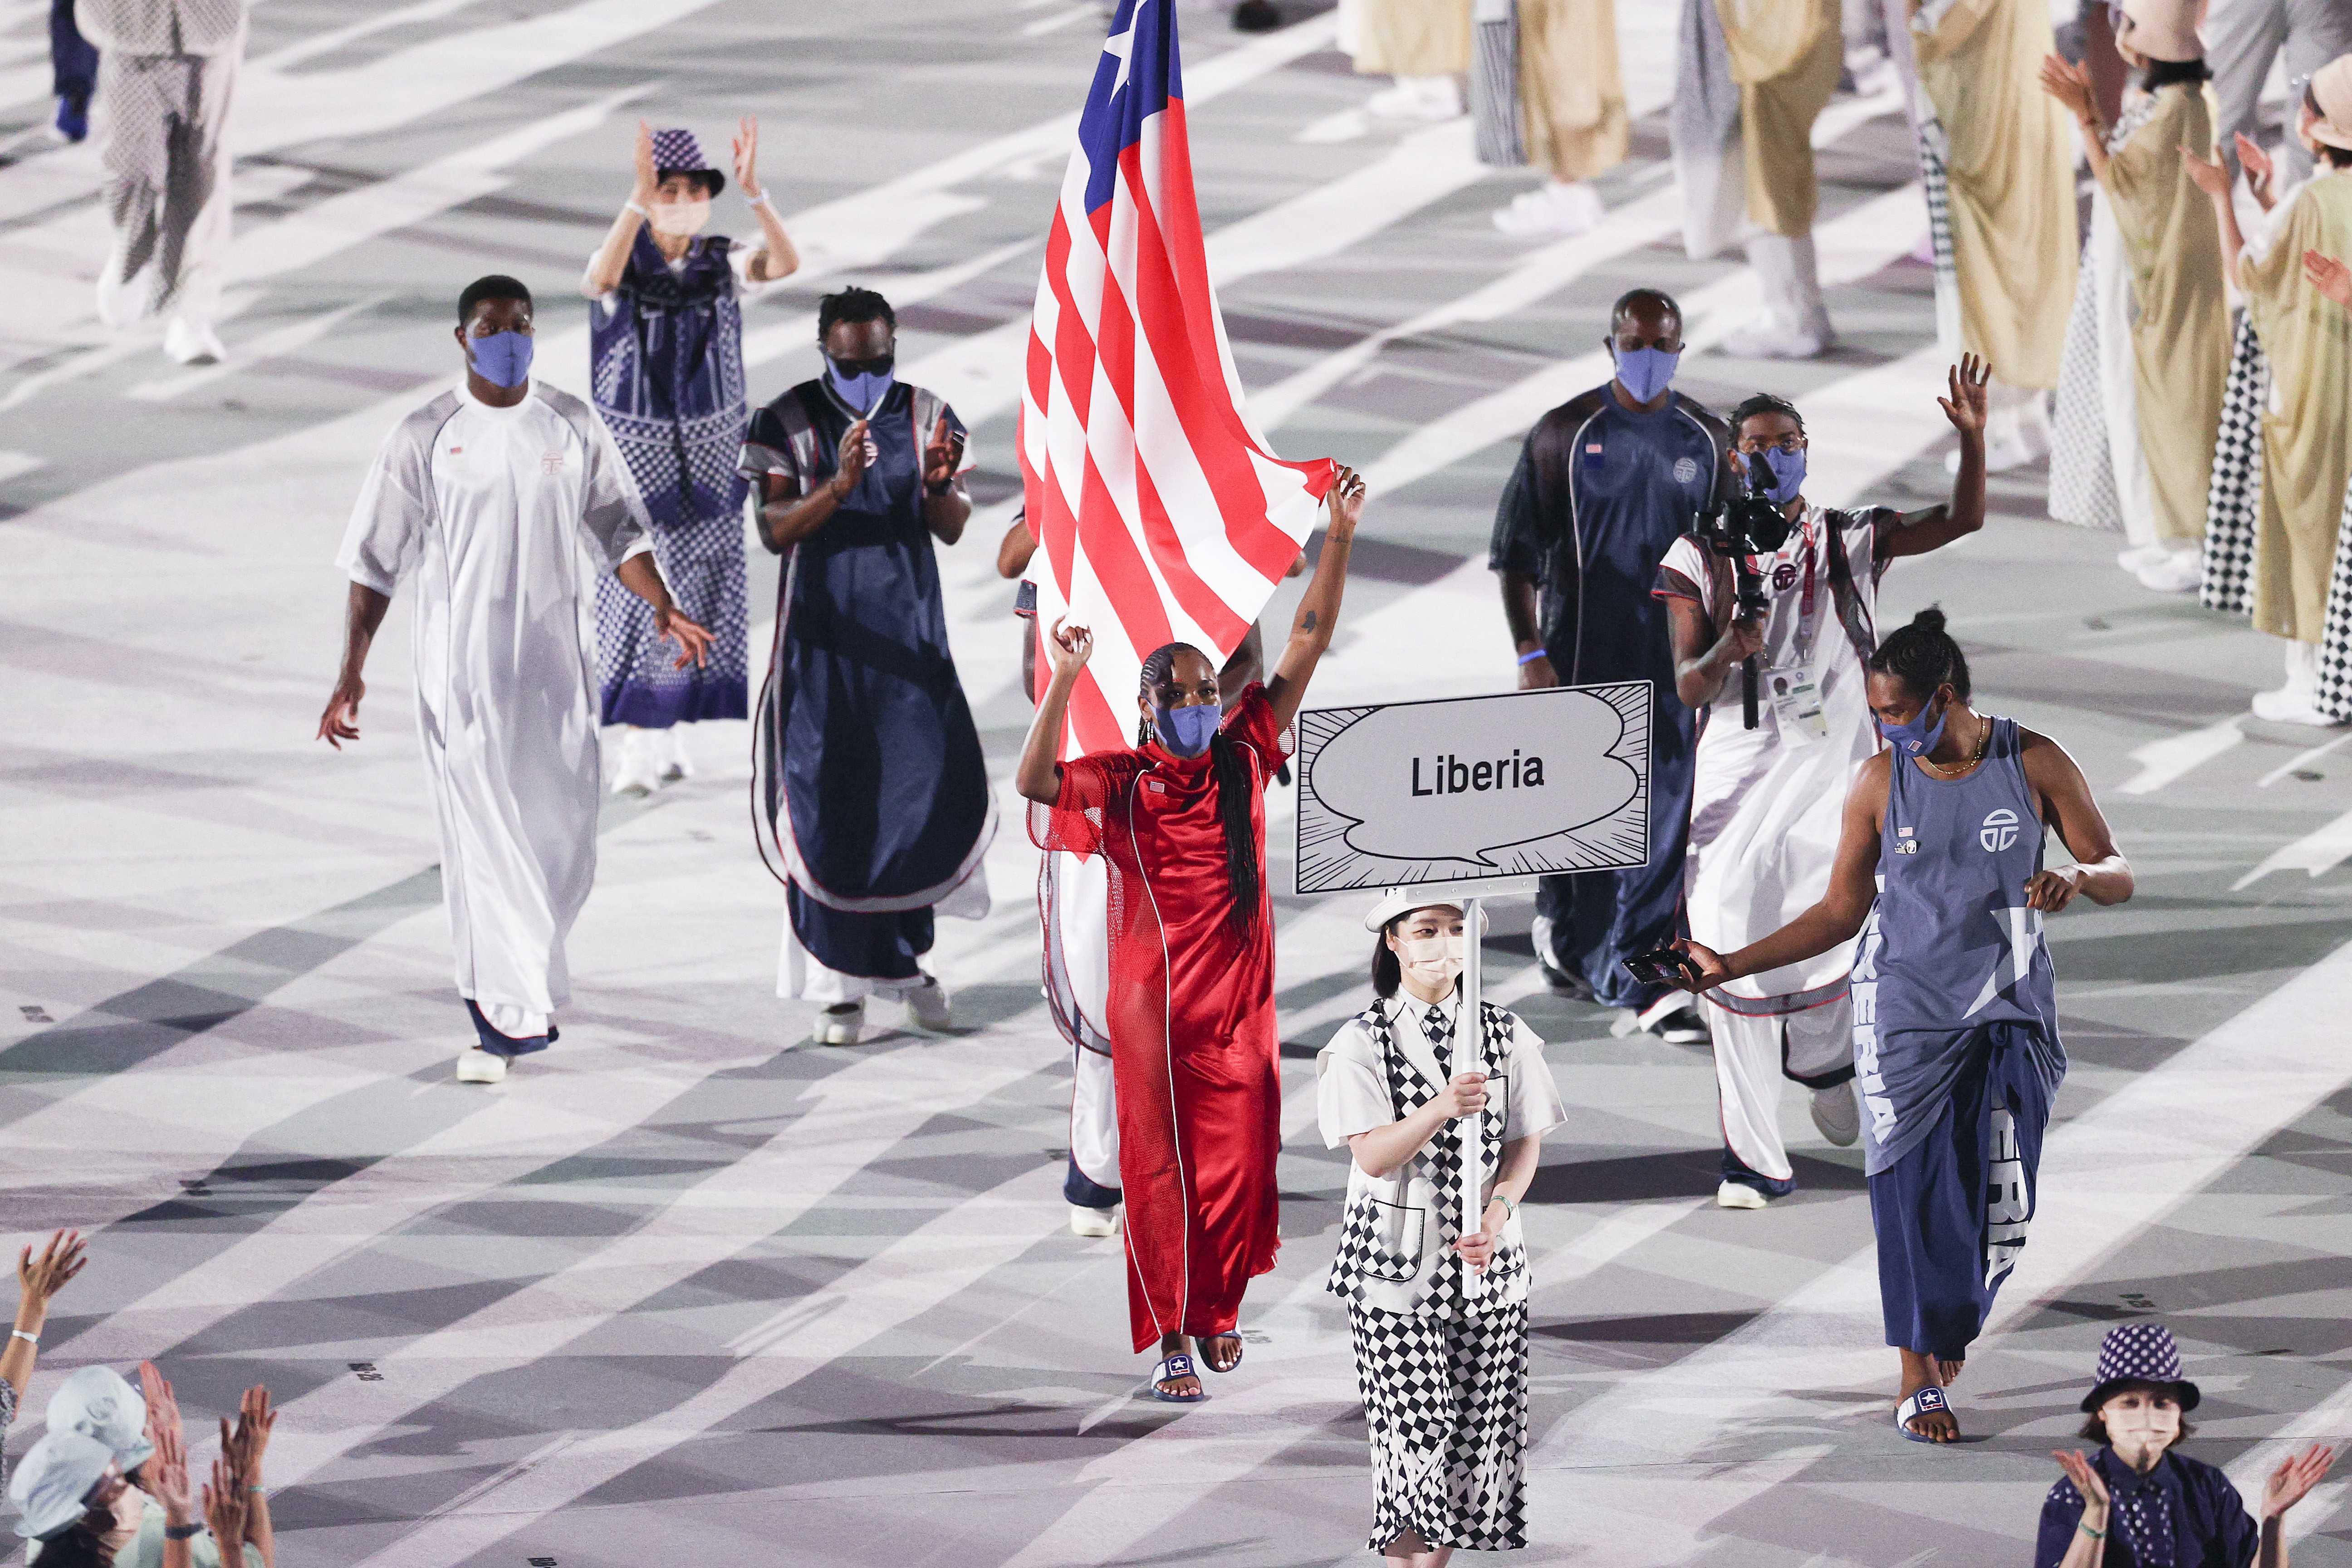 TOKYO, JAPAN - JULY 23: Flag bearers Ebony Morrison and Joseph Fahnbulleh of Team Liberia during the Opening Ceremony of the Tokyo 2020 Olympic Games at Olympic Stadium on July 23, 2021 in Tokyo, Japan. (Photo by Patrick Smith/Getty Images) (Foto: Getty Images)